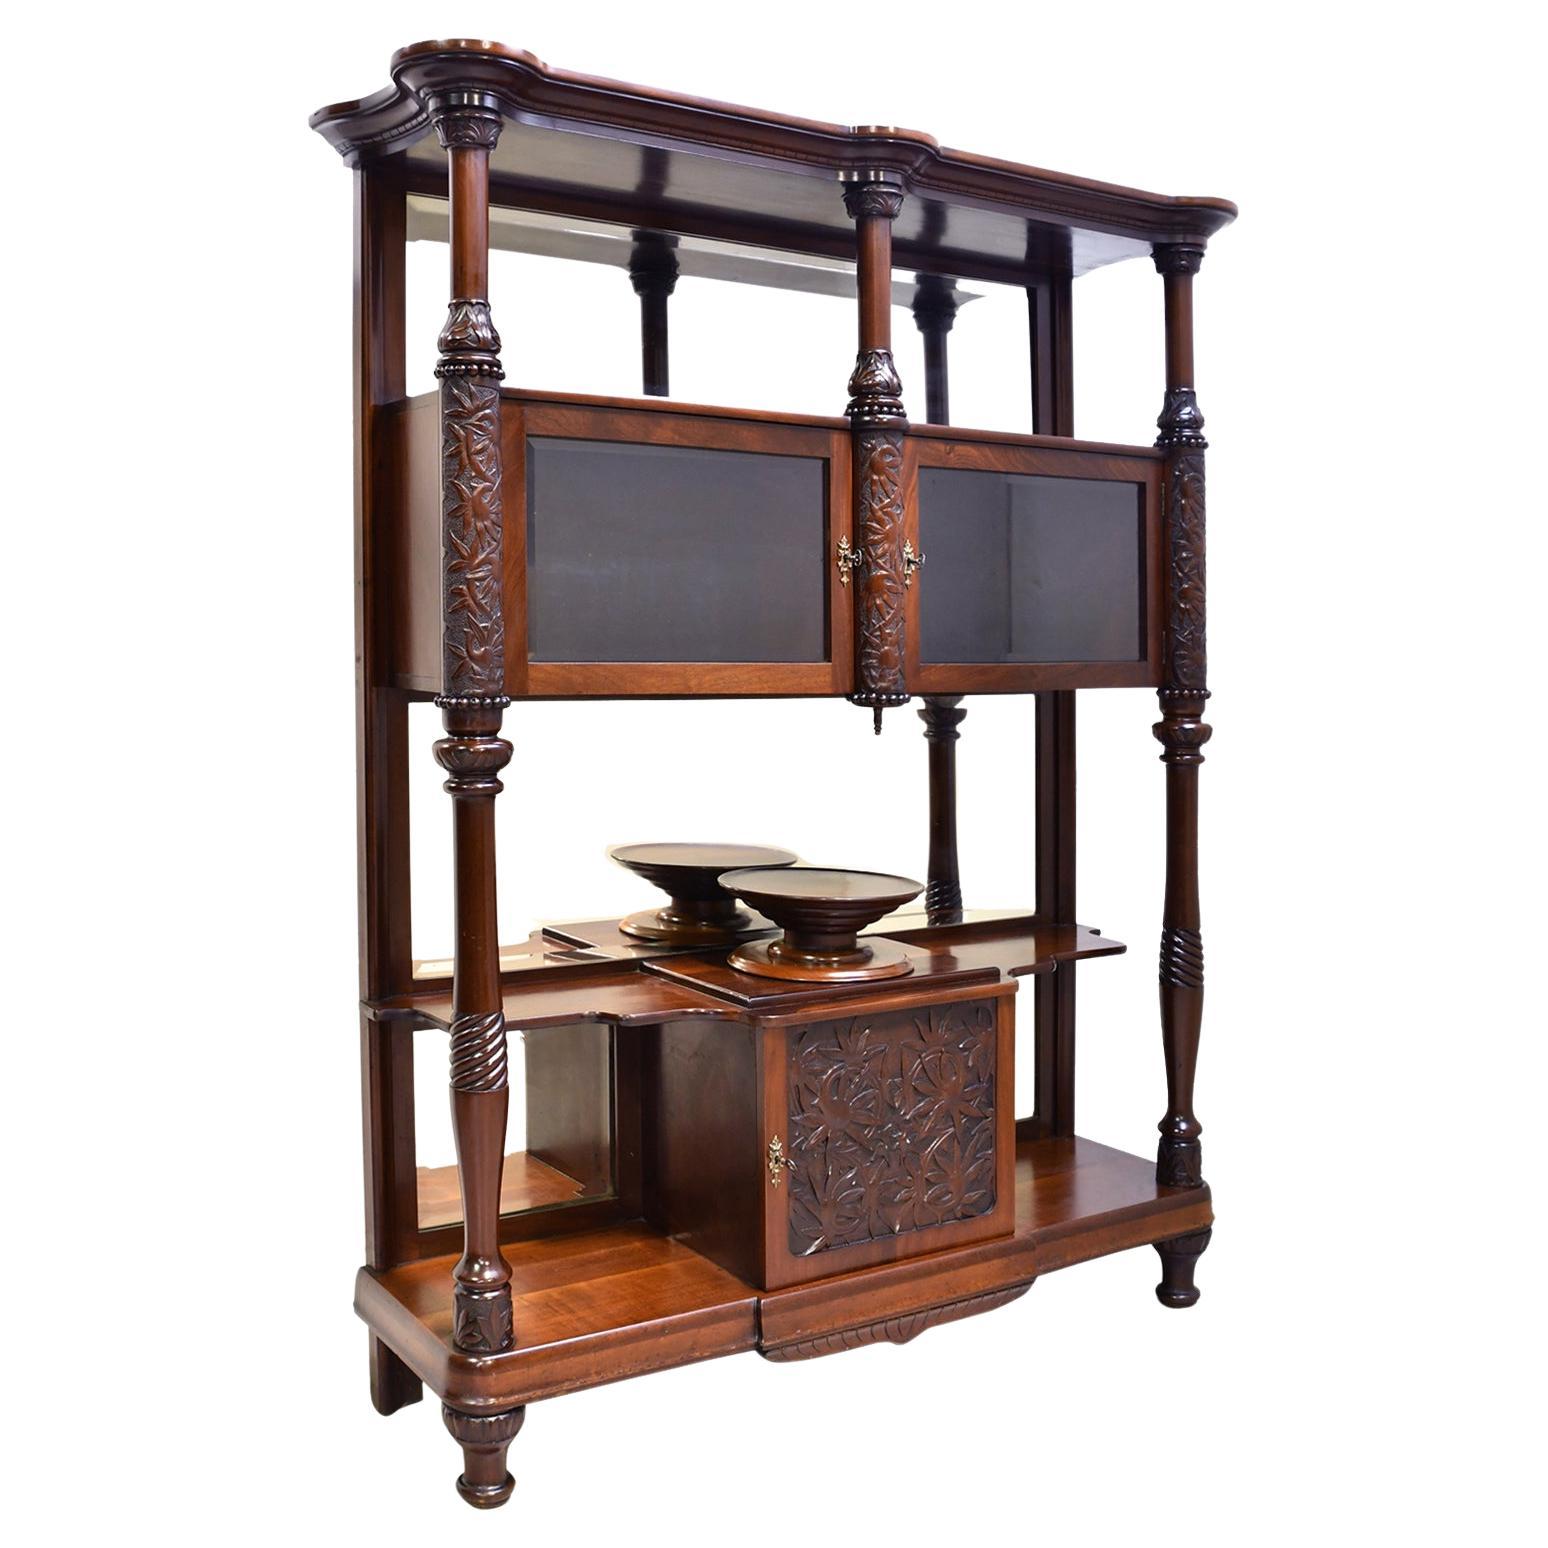 A highly unusual and very beautiful desert cupboard/ vitrine in mahogany from the Belle Époque period. This elaborate dumbwaiter offers a mirrored back with open shelving, closed storage and display areas, with a wooden lazy-Susan platter, probably